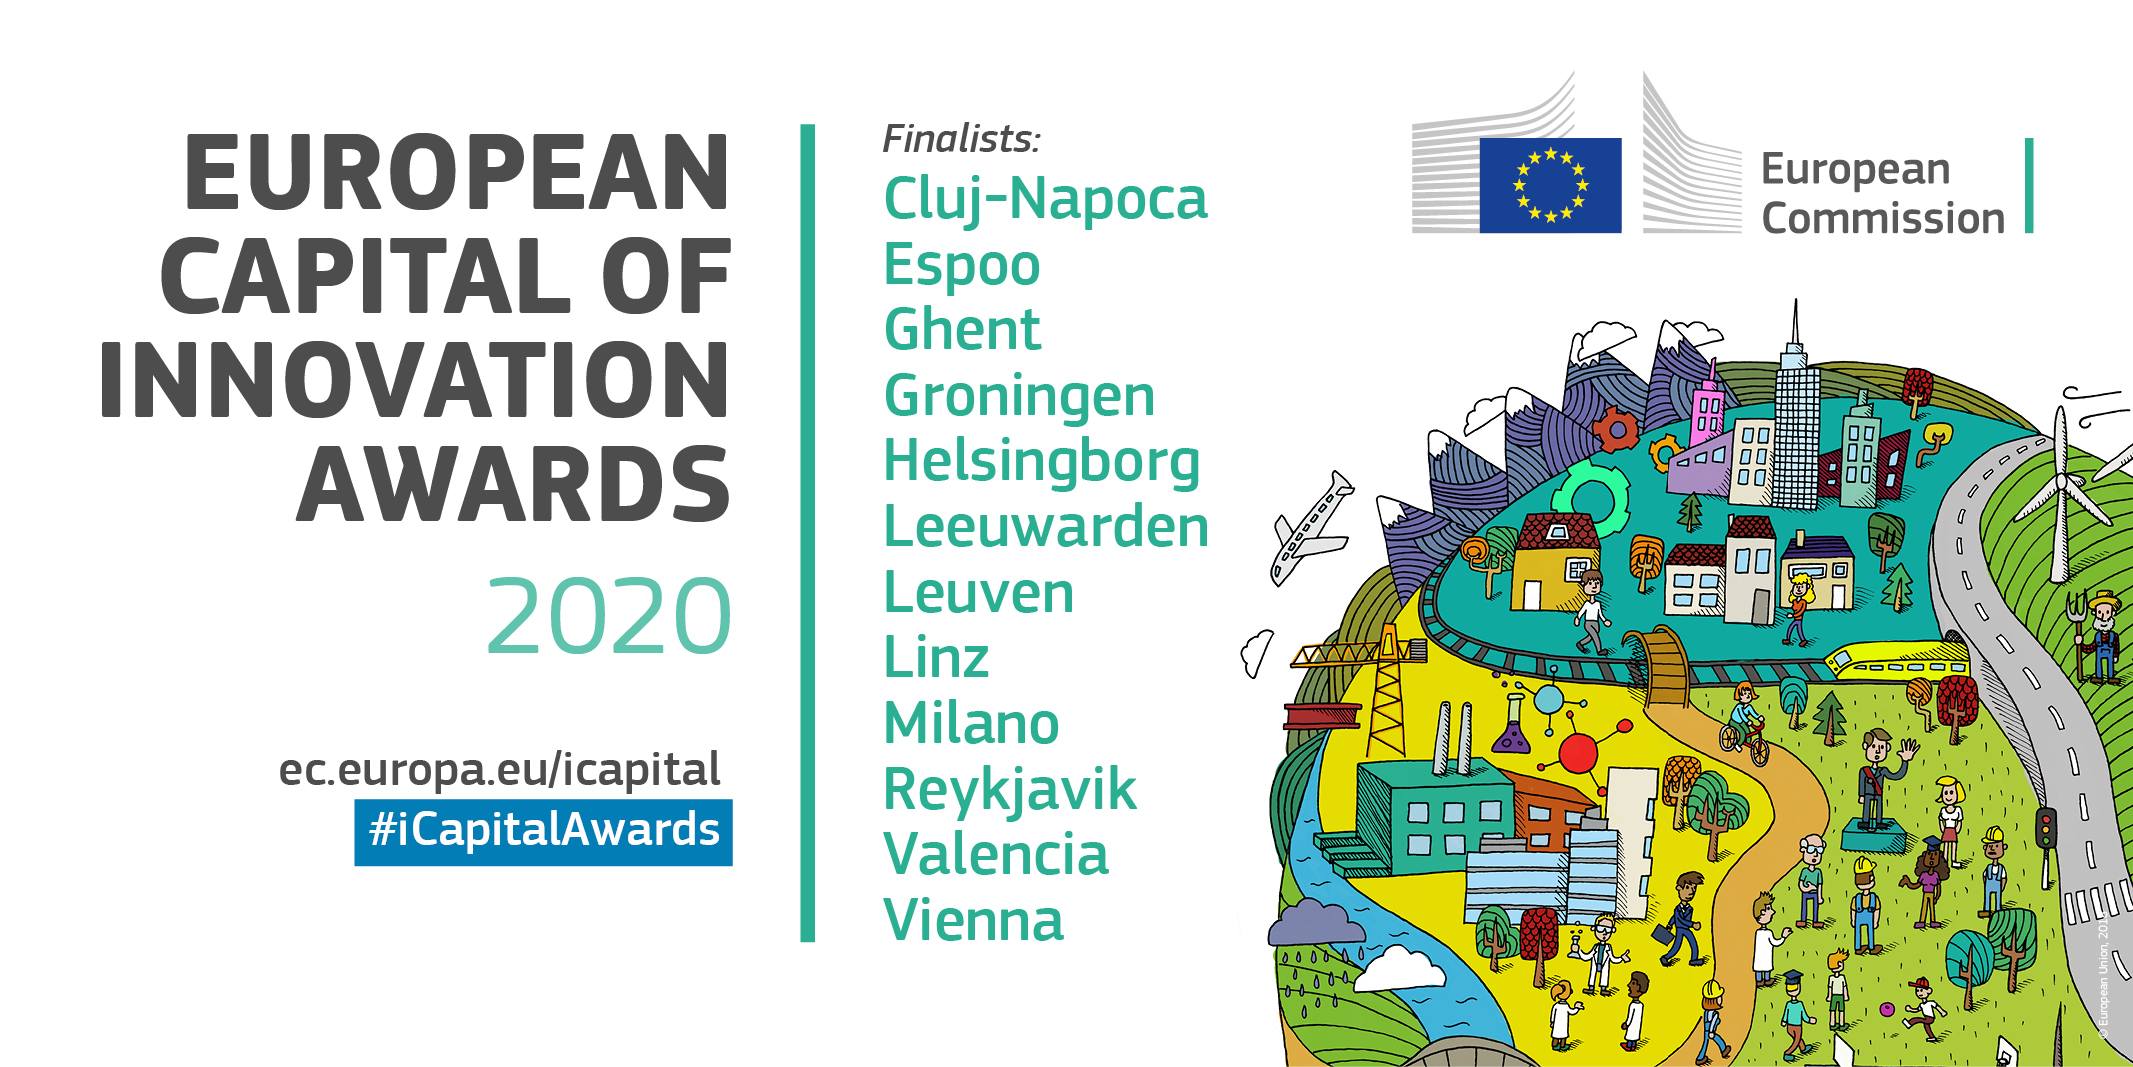 Finalists announced for European Capital of Innovation